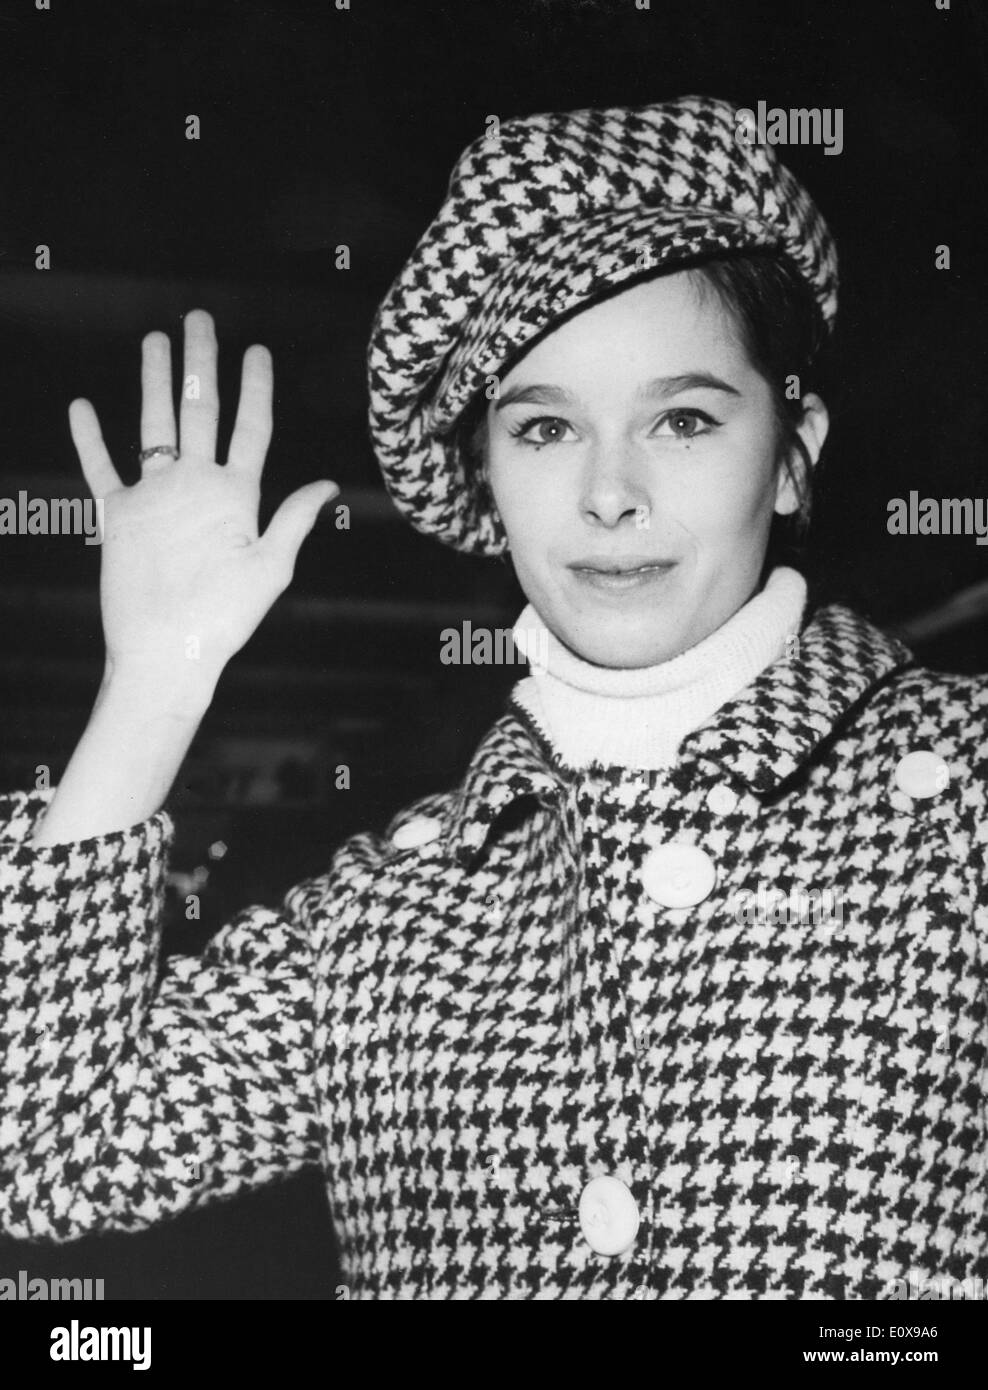 Dec. 7, 1965 - Paris, France - Ballet dancer GERALDINE CHAPLIN wearing a checkered outfit prepares to board a plane at Orly Airport to New York, for the premiere of the film, 'Doctor Zhivago.' Stock Photo